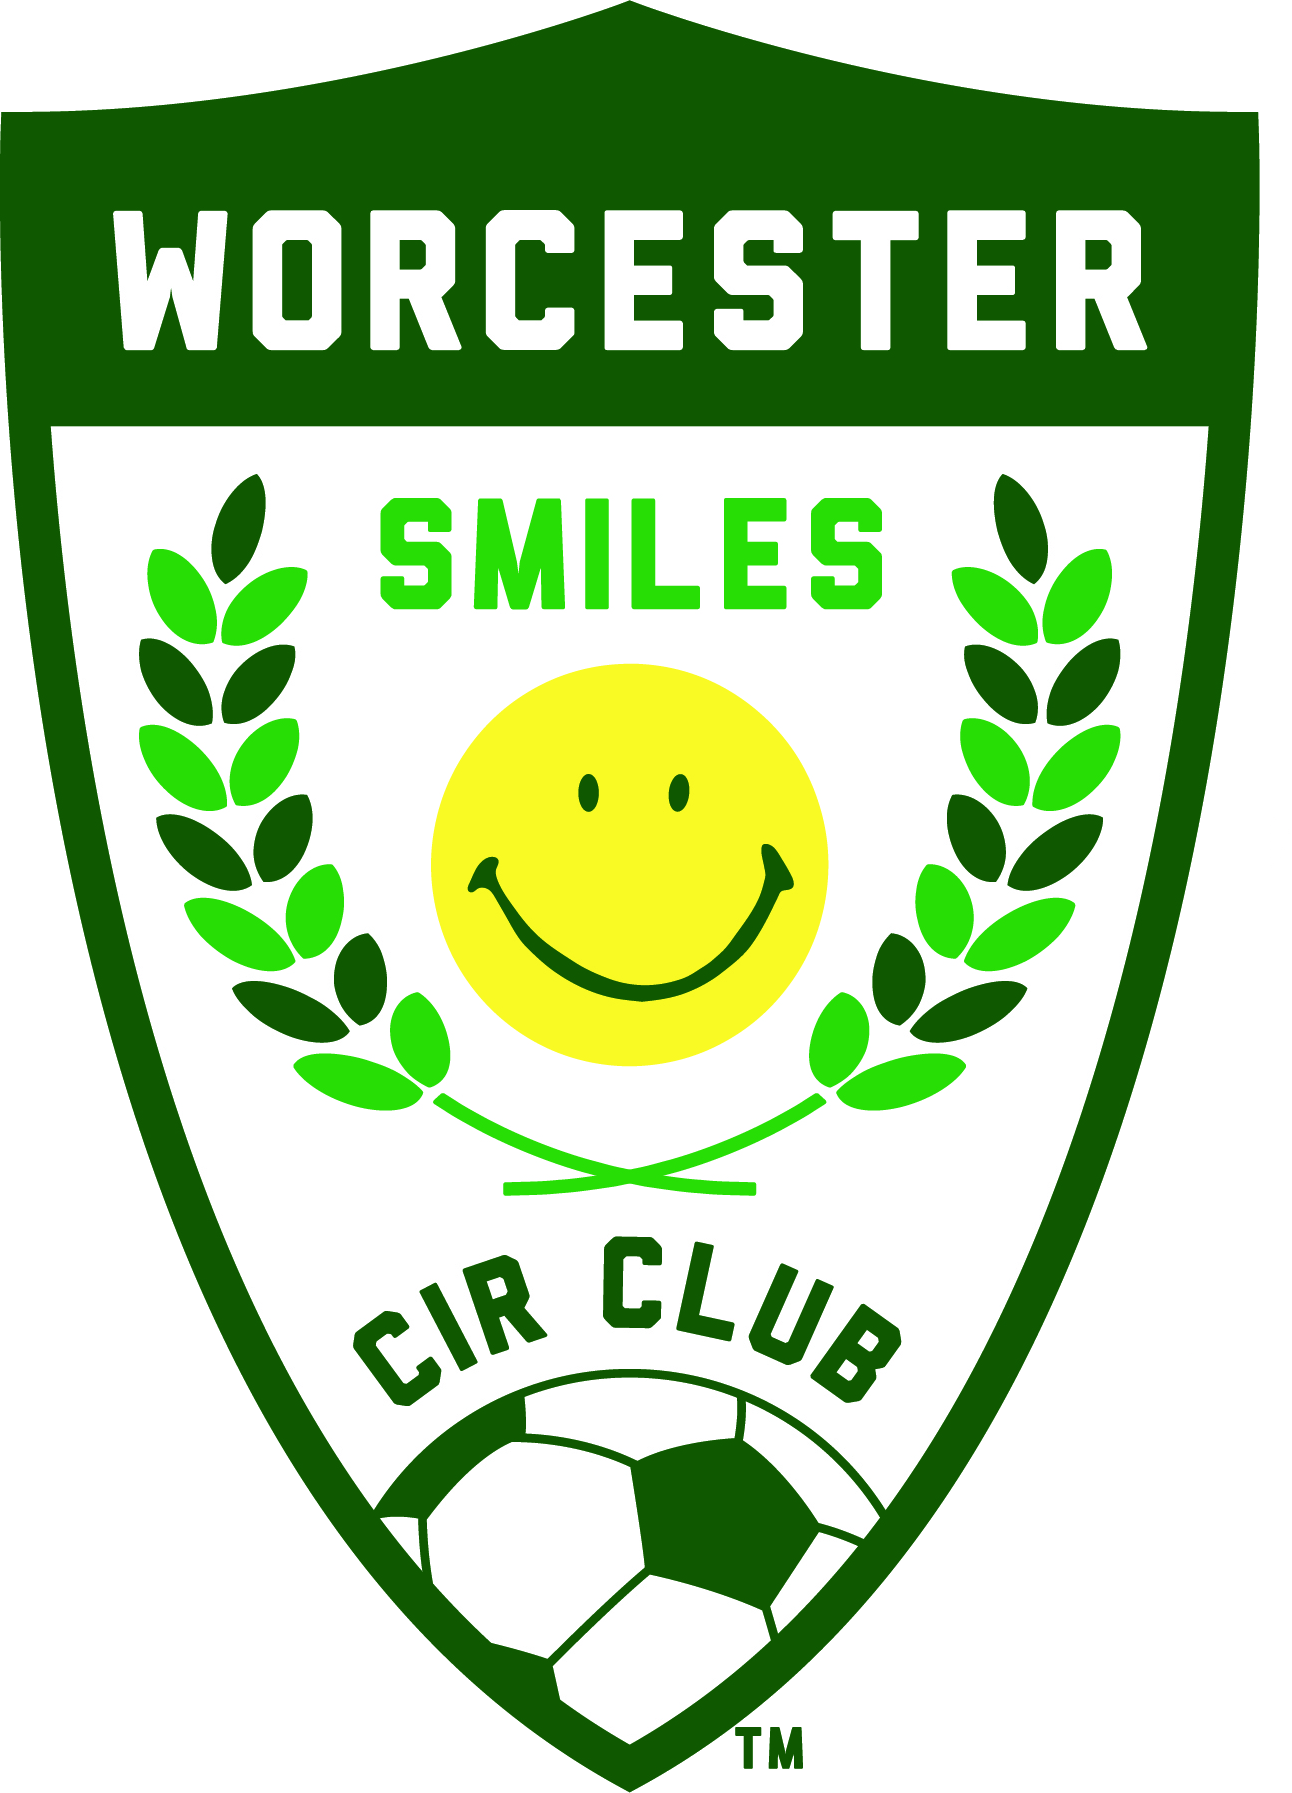 Worcester Smiles